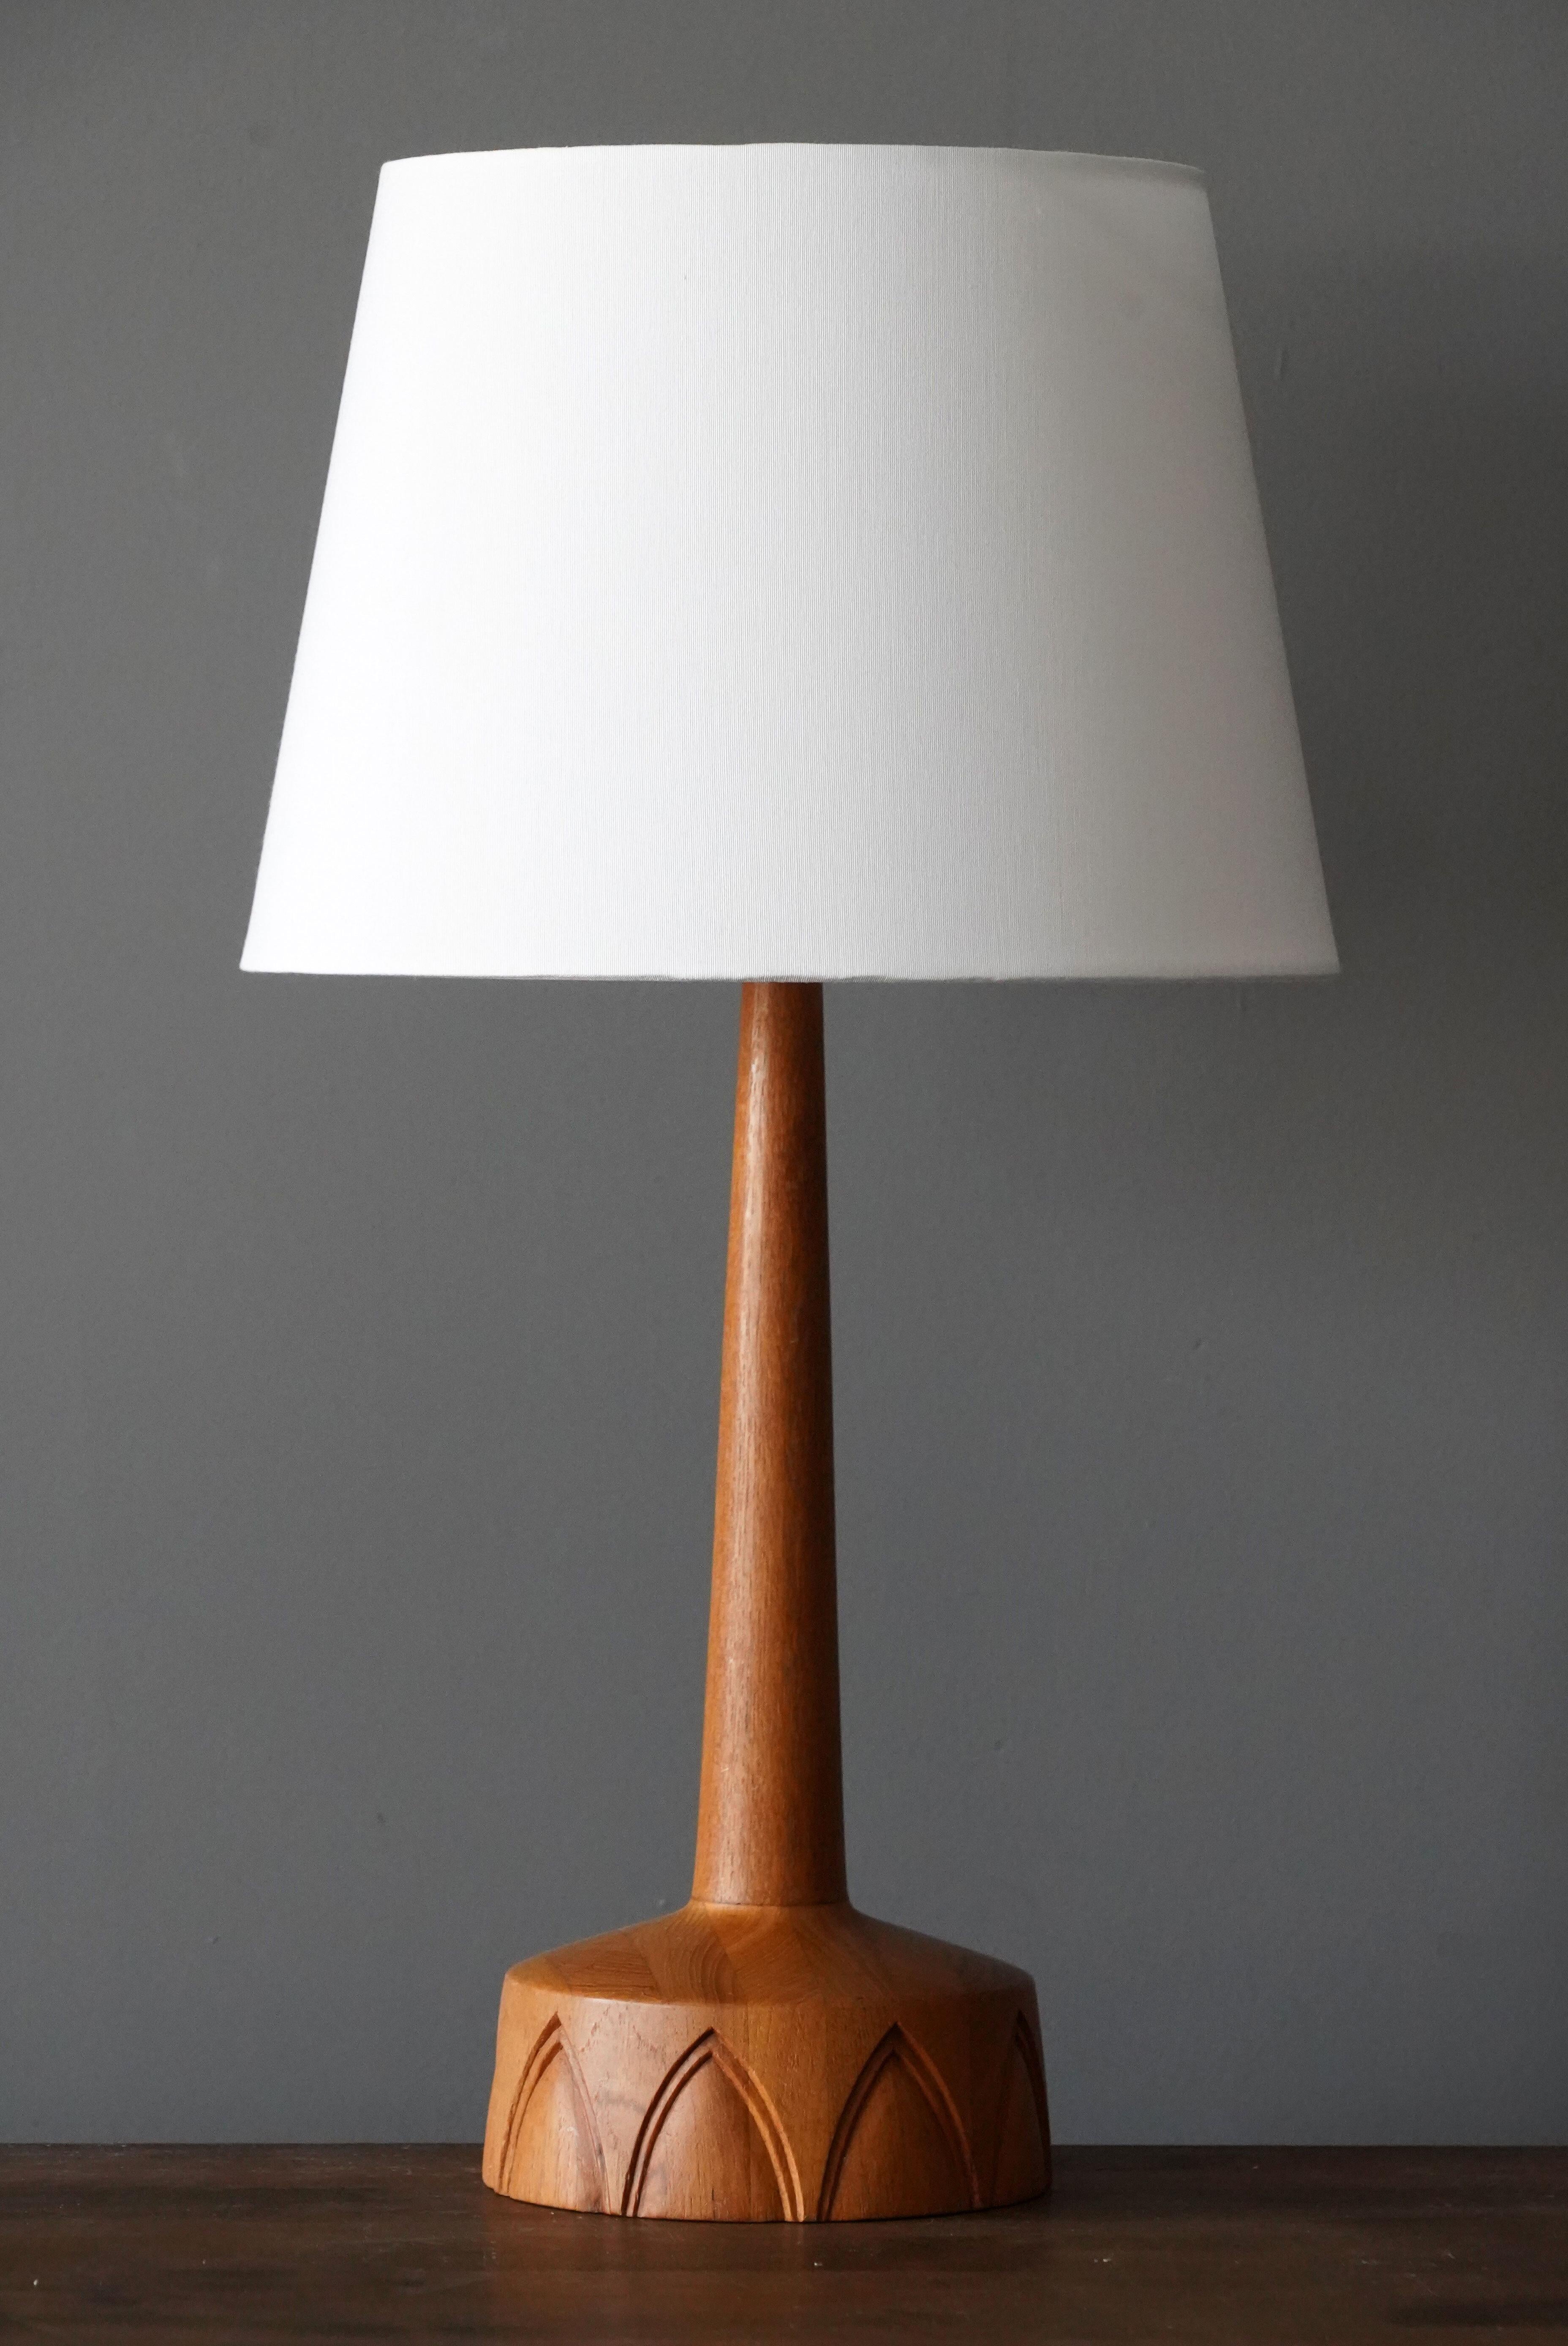 A finely sculpted teak table lamp. Produced in Sweden, 1960s. 

Sold without lampshade. Dimensions without lampshades.

Other designers of the period include Hans Agne Jacobsen, Josef Frank, Palshus, Kaare Klint, and Hans Bergström.